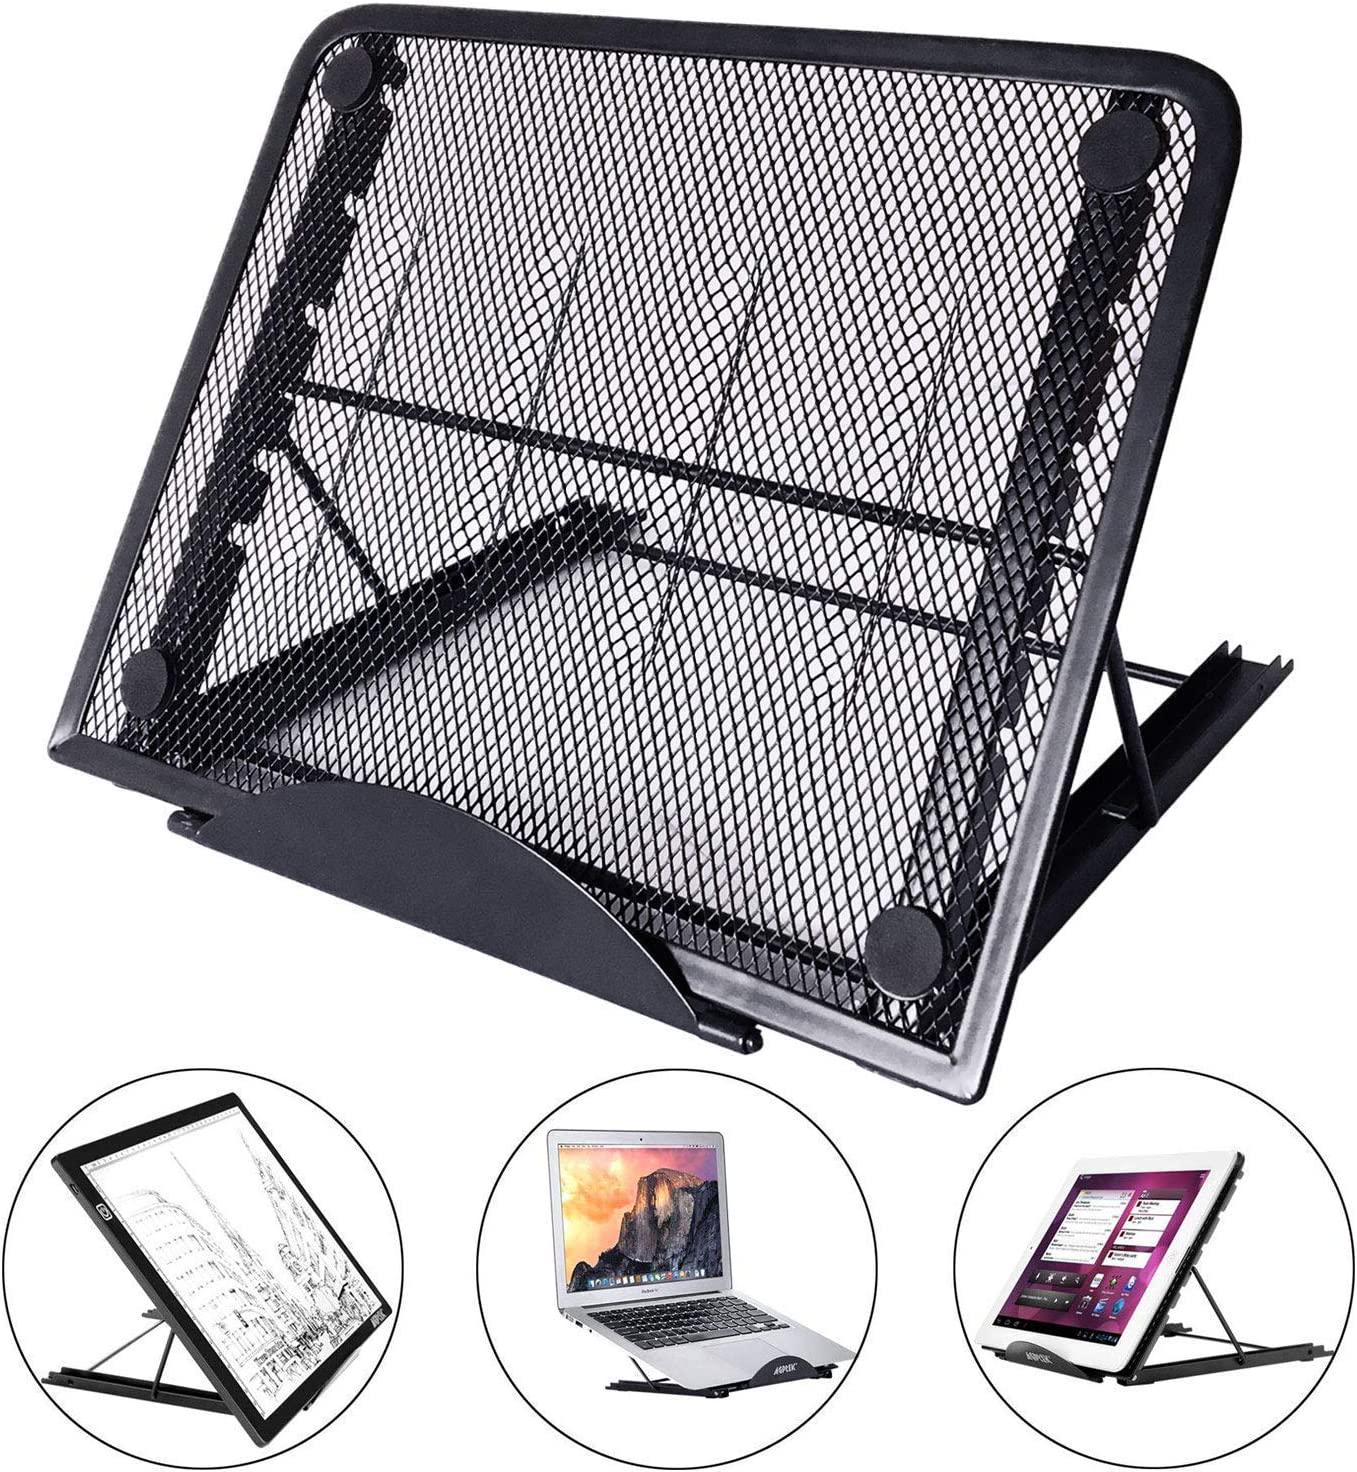 LURICO, Light Box Pad Stand, Multifunction 7 Angle Points Skidding Prevented Stand LED Light Table/Huion Laptop LED Light Table A4 LB4 L4S and Most tracing Ligh Box pad